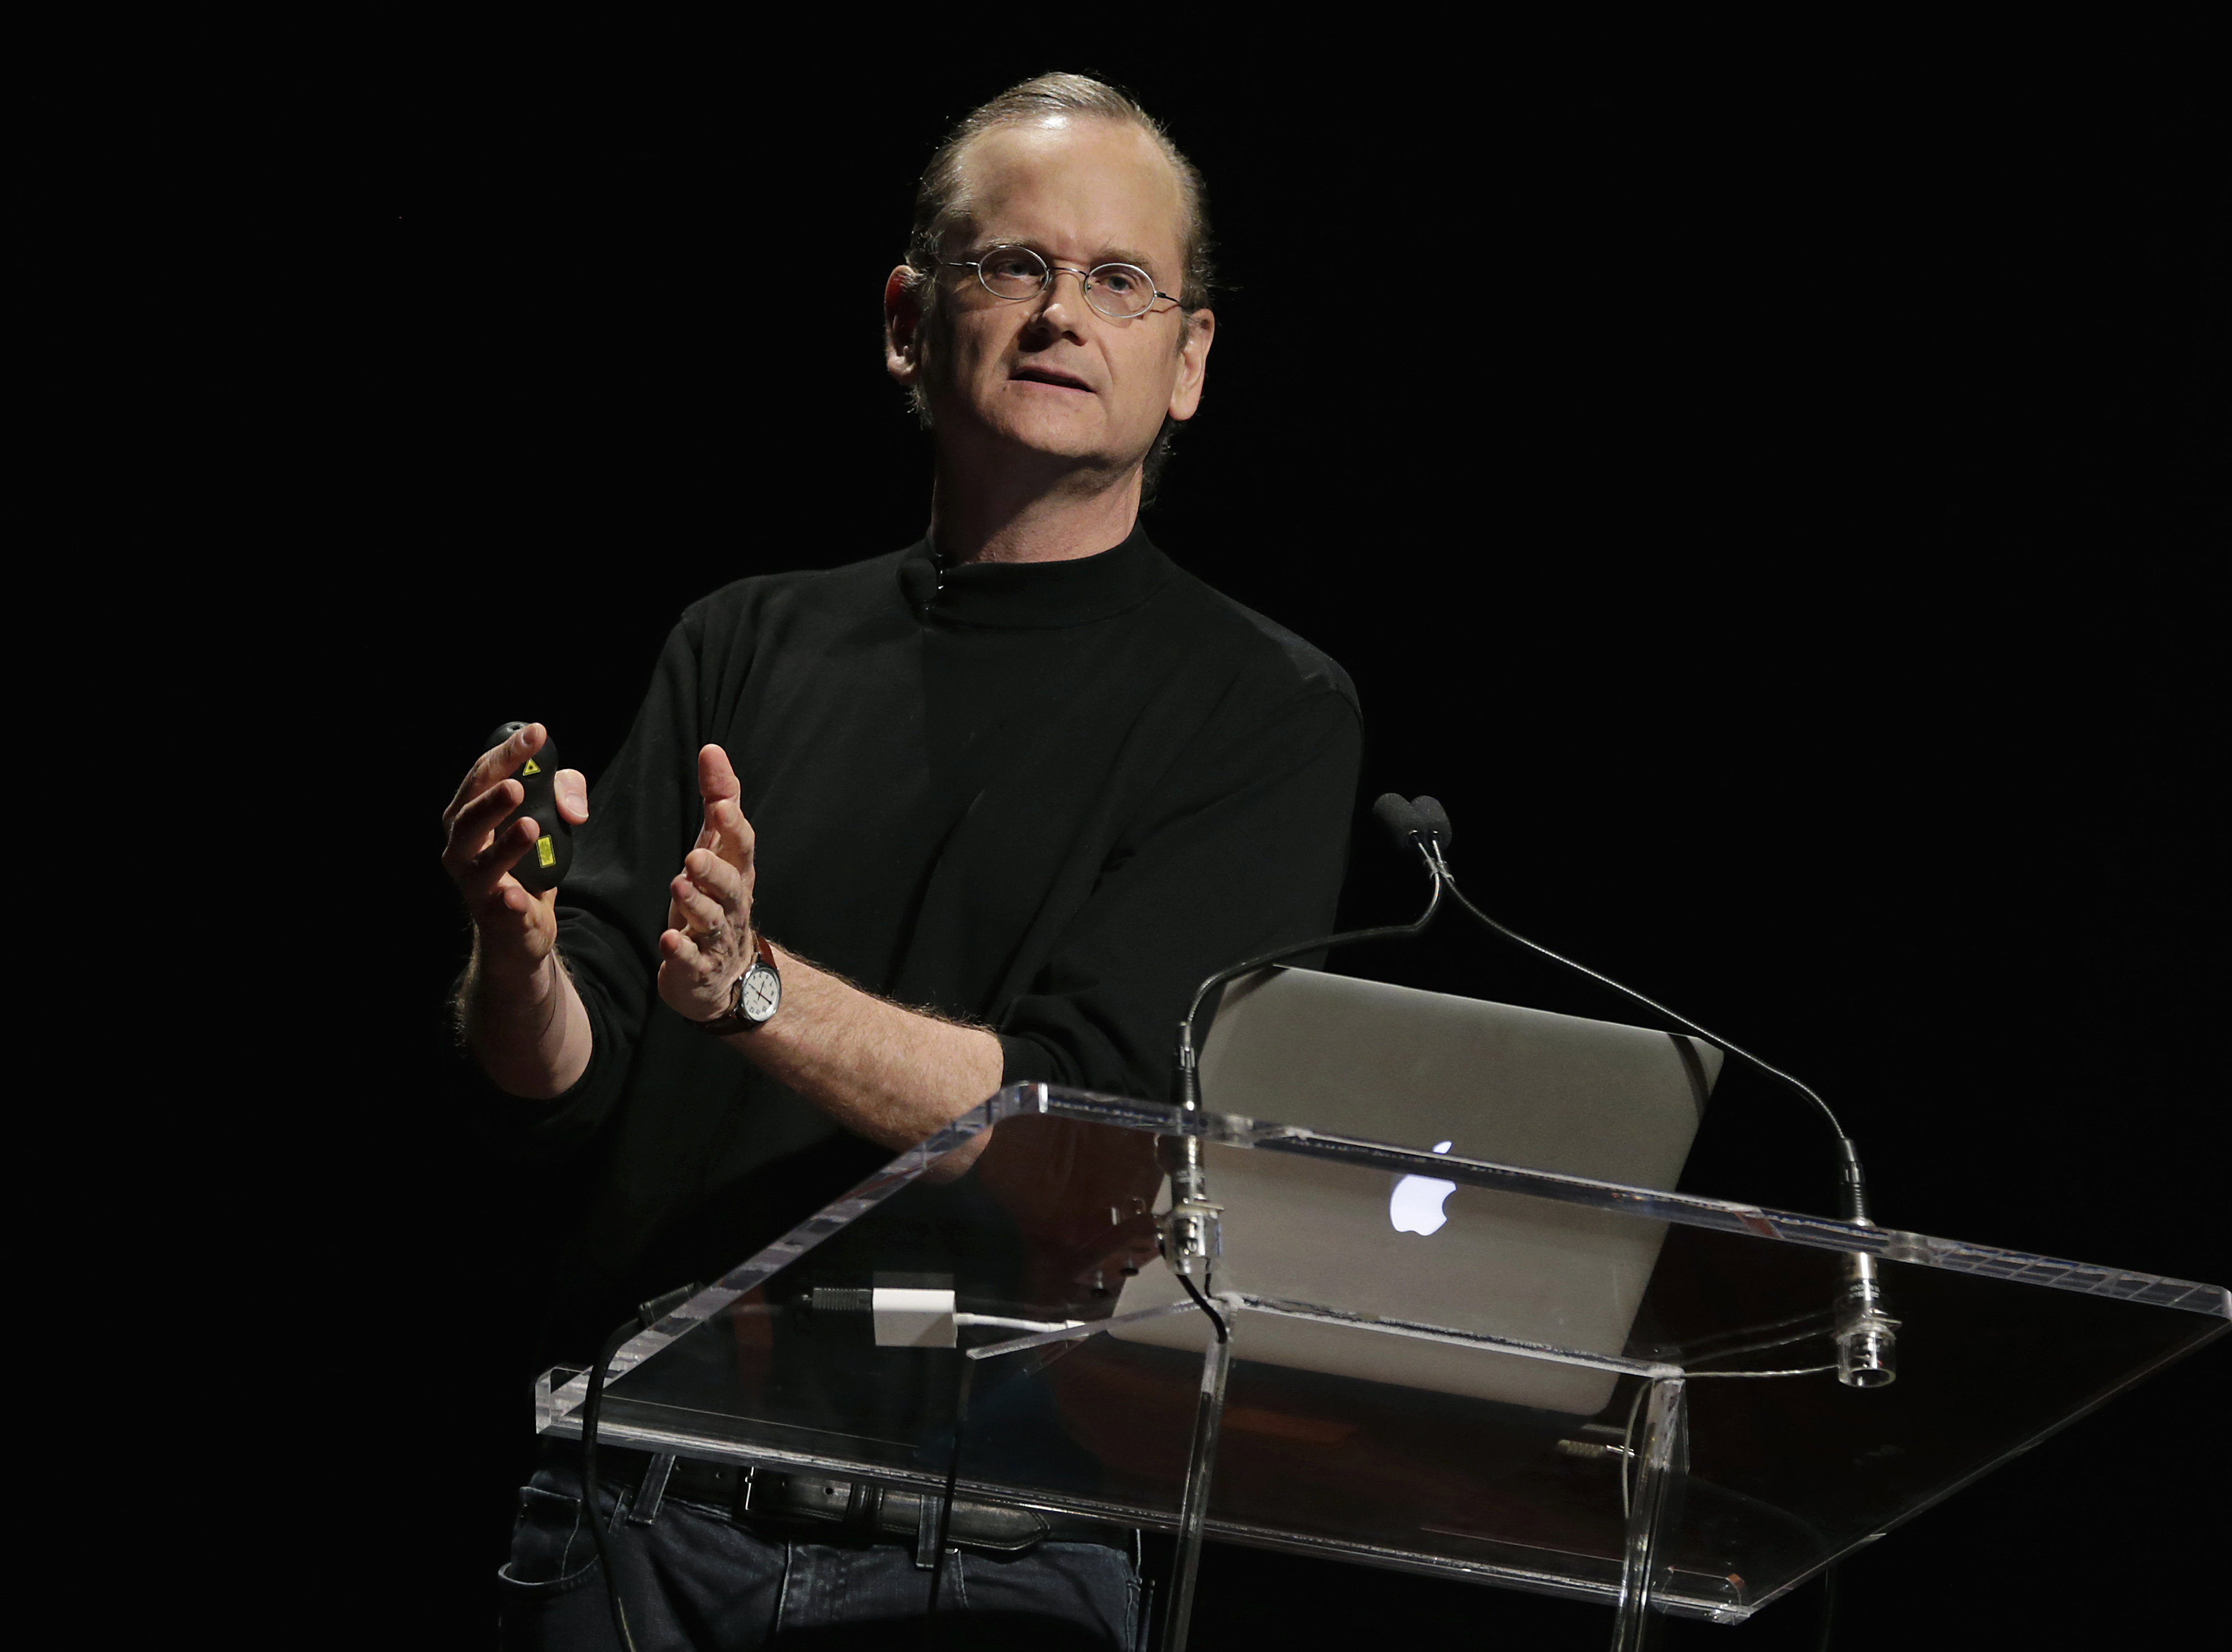 Lawrence Lessig, professor at Harvard Law School, speaks during the 2014 WIRED Business Conference (BizCon) in New York, U.S., on Tuesday, May 13, 2014. (Bloomberg—Bloomberg via Getty Images)